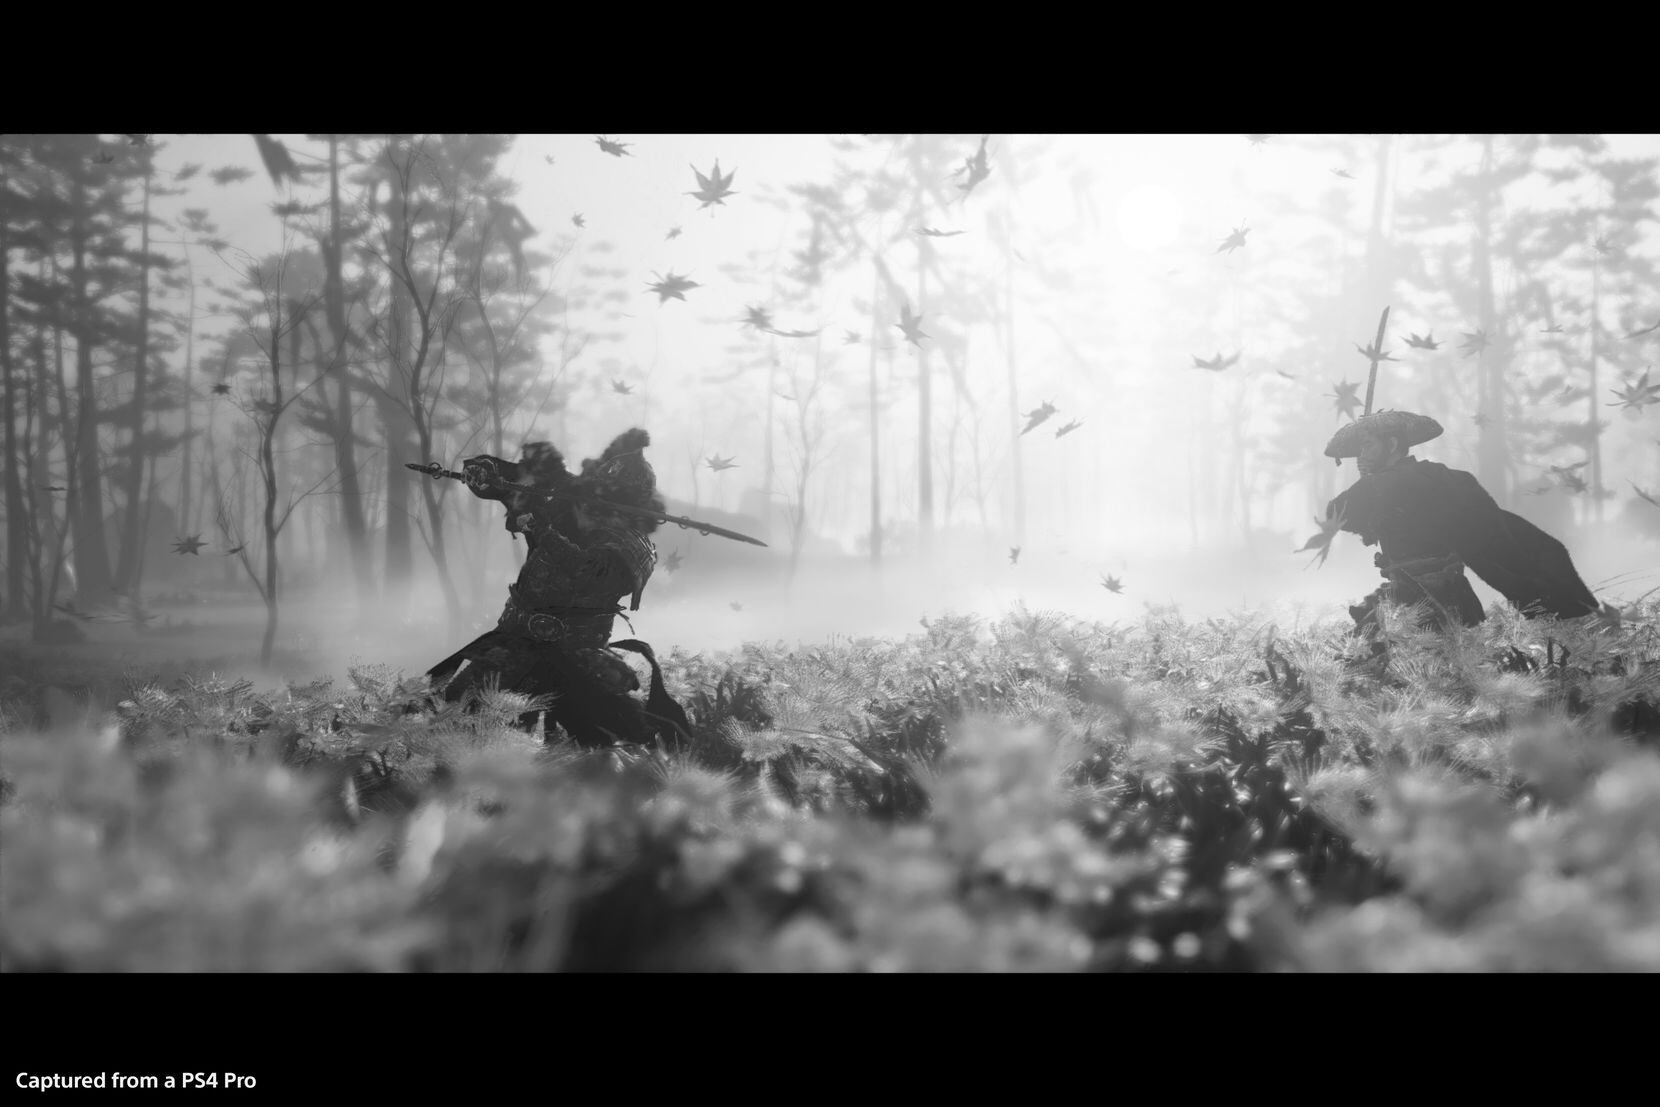 Ghost Of Tsushima Background Explore more Action, Adventure, Game, Ghost Of  Tsushima, Japan wallpaper.